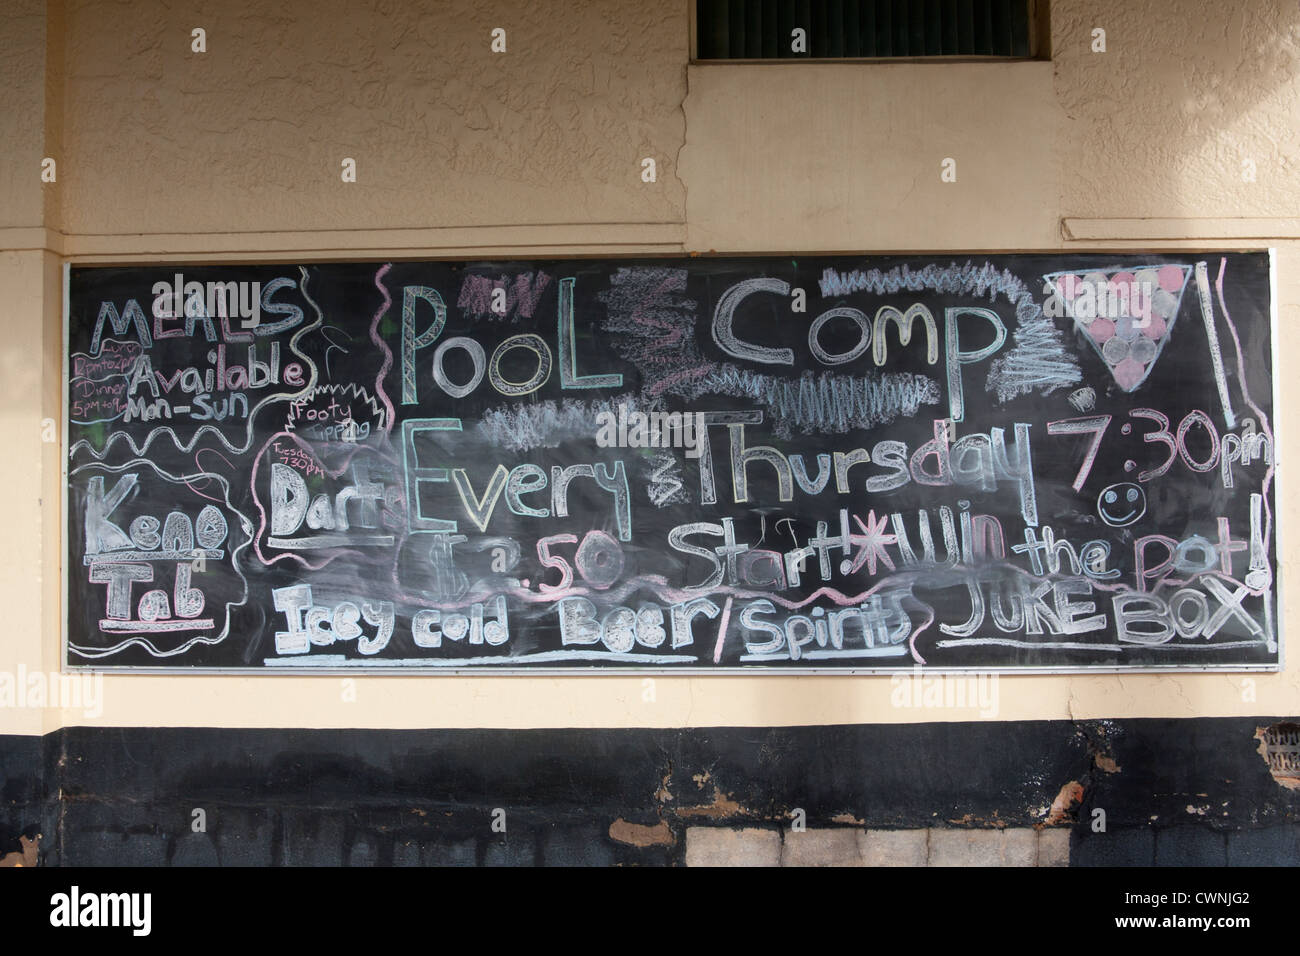 Blackboard / chalkboard outside pub with events notices Boggabri New South Wales Australia Stock Photo